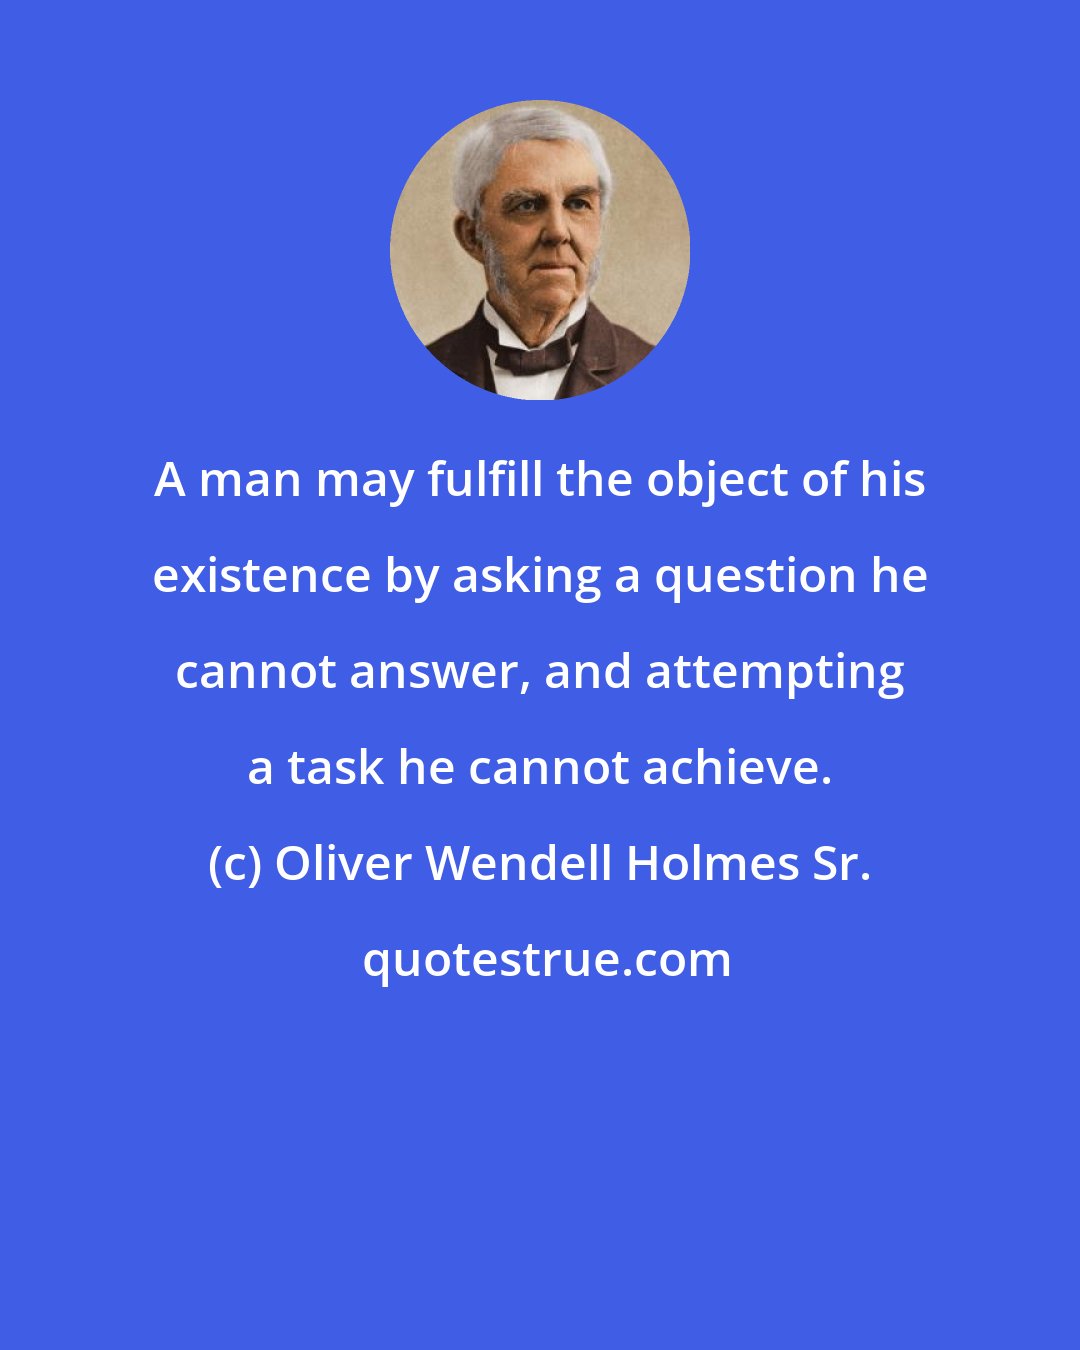 Oliver Wendell Holmes Sr.: A man may fulfill the object of his existence by asking a question he cannot answer, and attempting a task he cannot achieve.